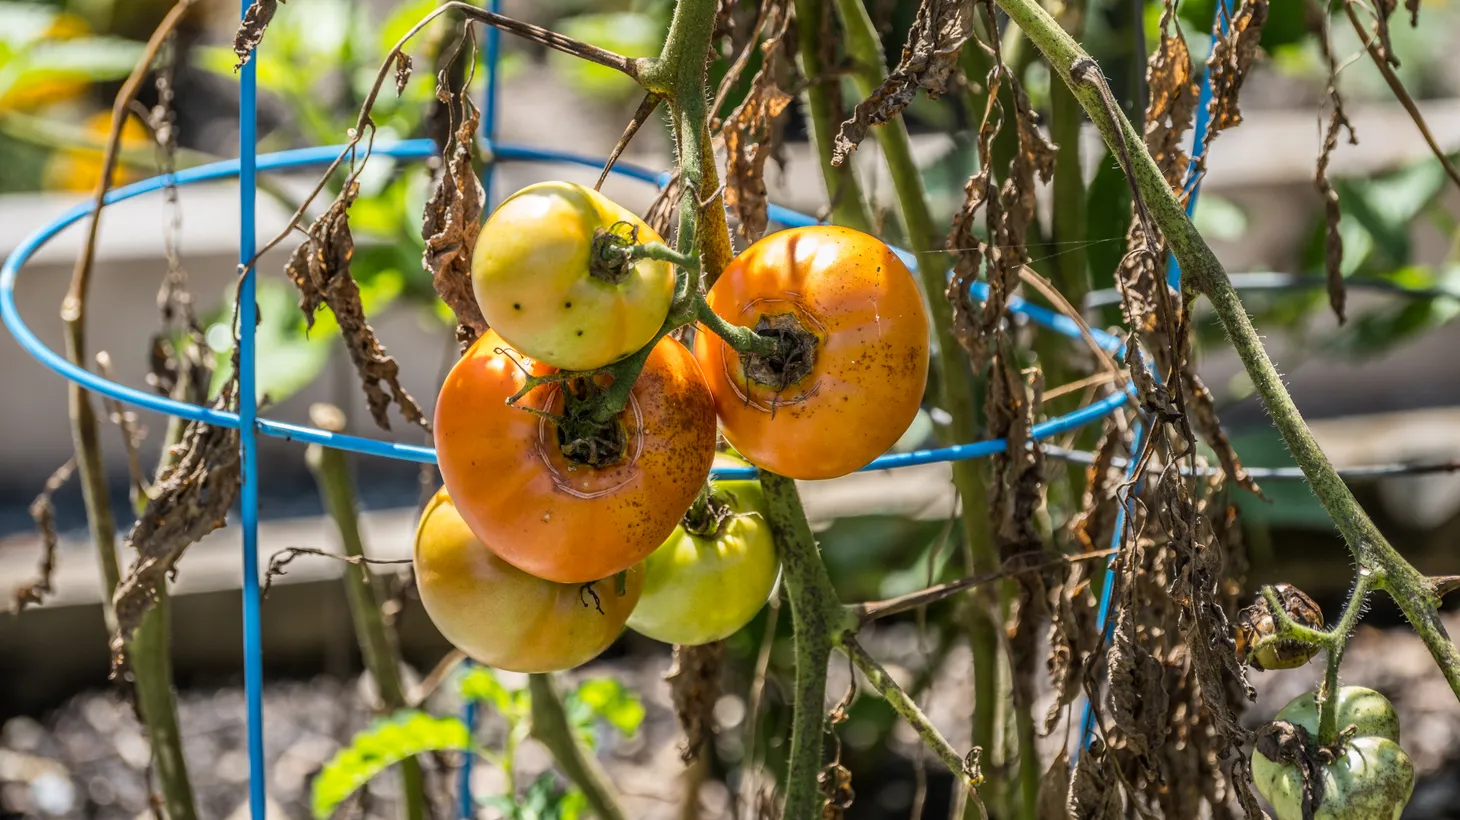 Dying tomatoes hang from vines on a hot day in the summer.